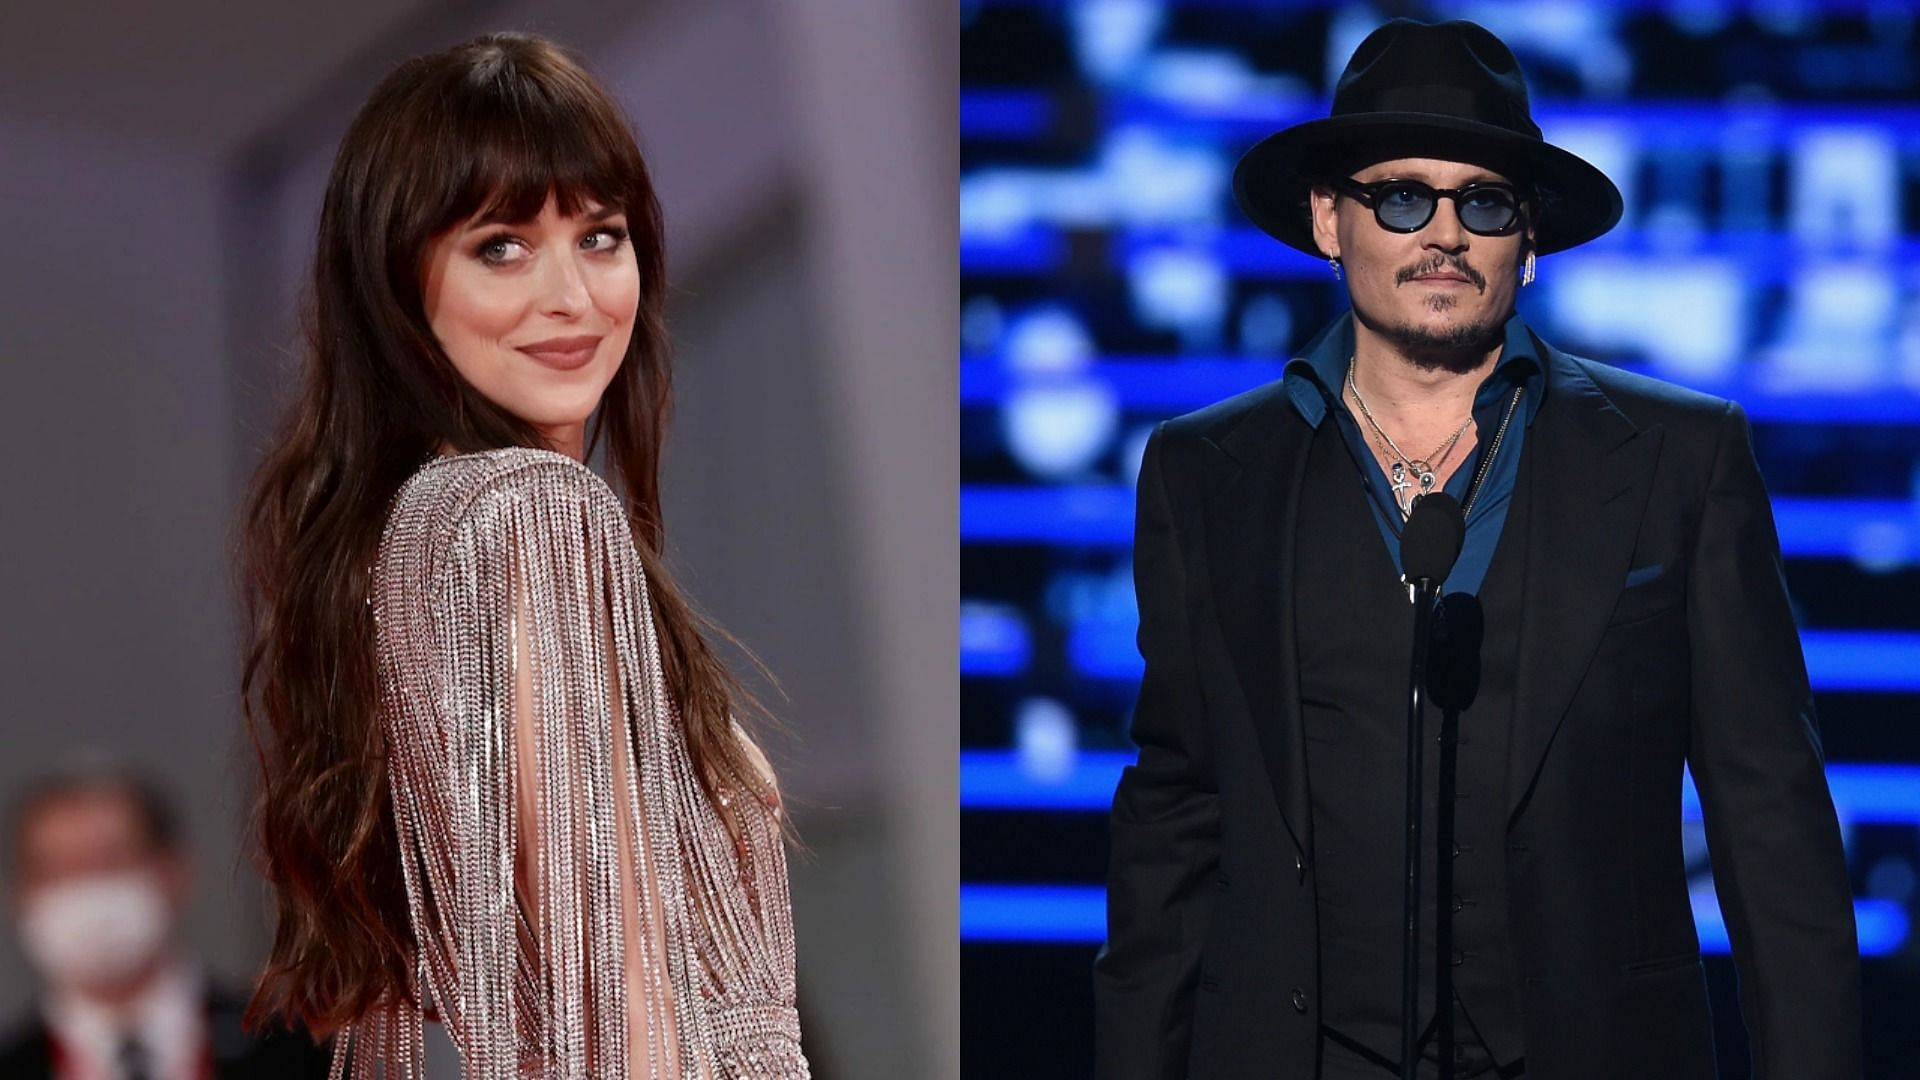 Dakota Johnson and Johnny Depp worked together in the 2015 film Black Mass (Image via Getty Images/Vittorio Zunino Celotto/Kevin Winter)